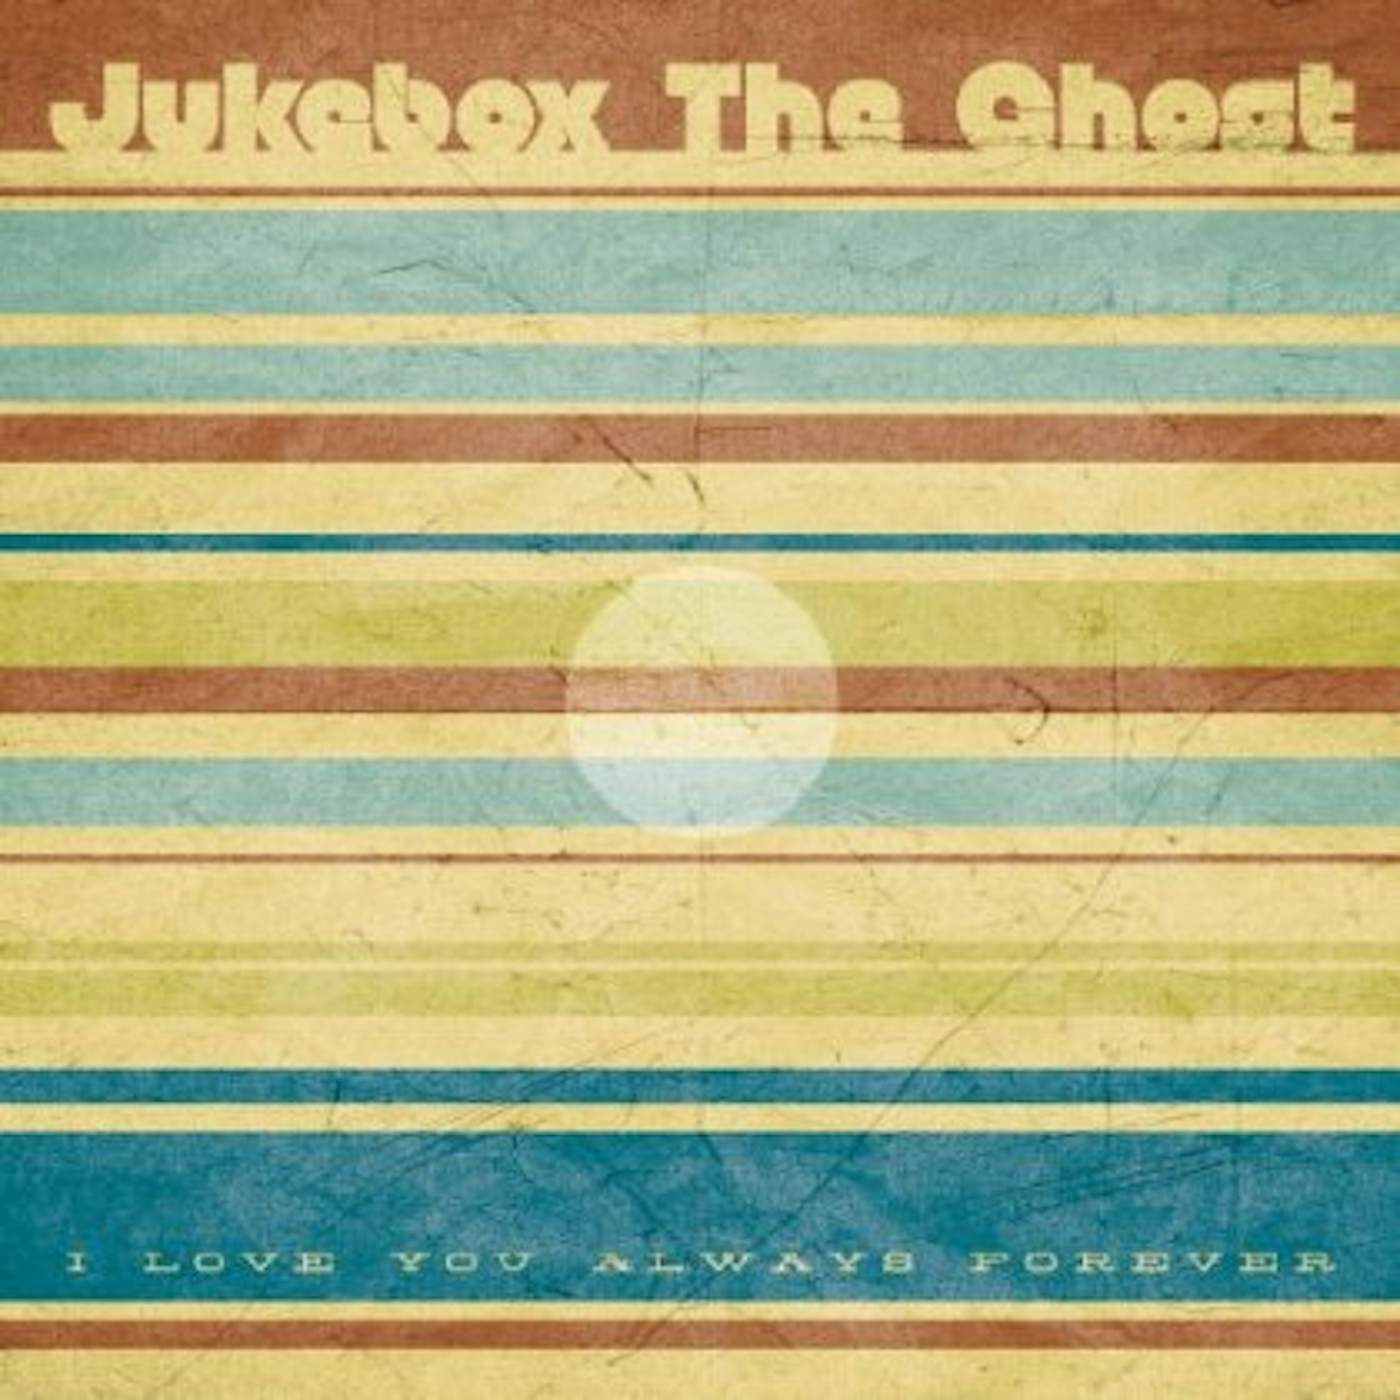 Jukebox The Ghost I LOVE YOU ALWAYS FOREVER Vinyl Record